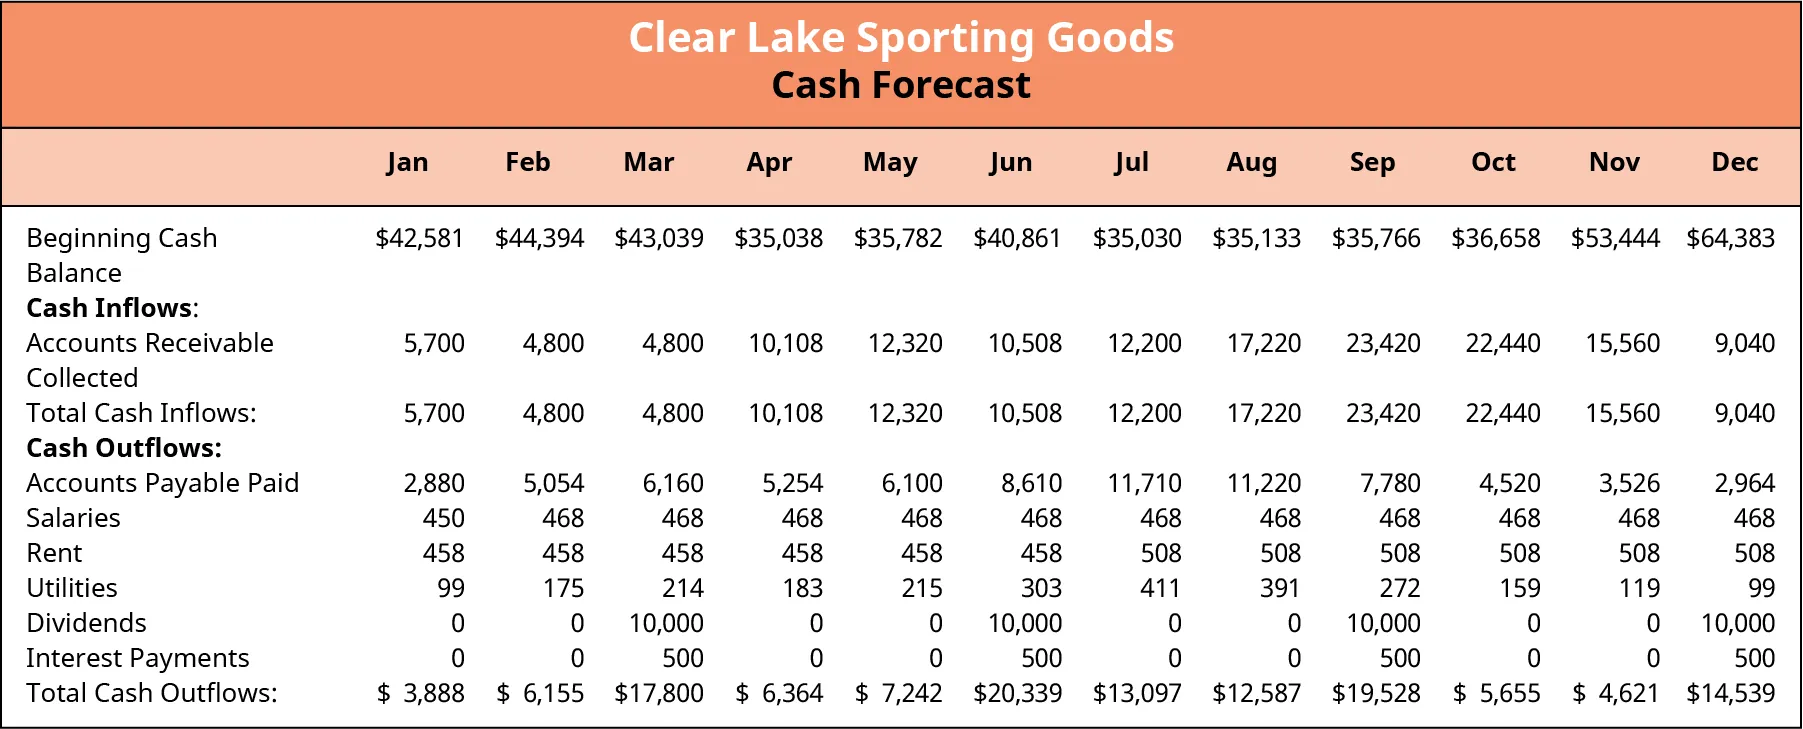 The monthly forecasted cash inflow and outflow sheet for Clear Lake Sporting Goods shows beginning cash balance, cash inflows, accounts receivables collected, total cash inflows, accounts payables, salaries, rent, utilities, dividends, interest payments, and total cash outflows from January to December.